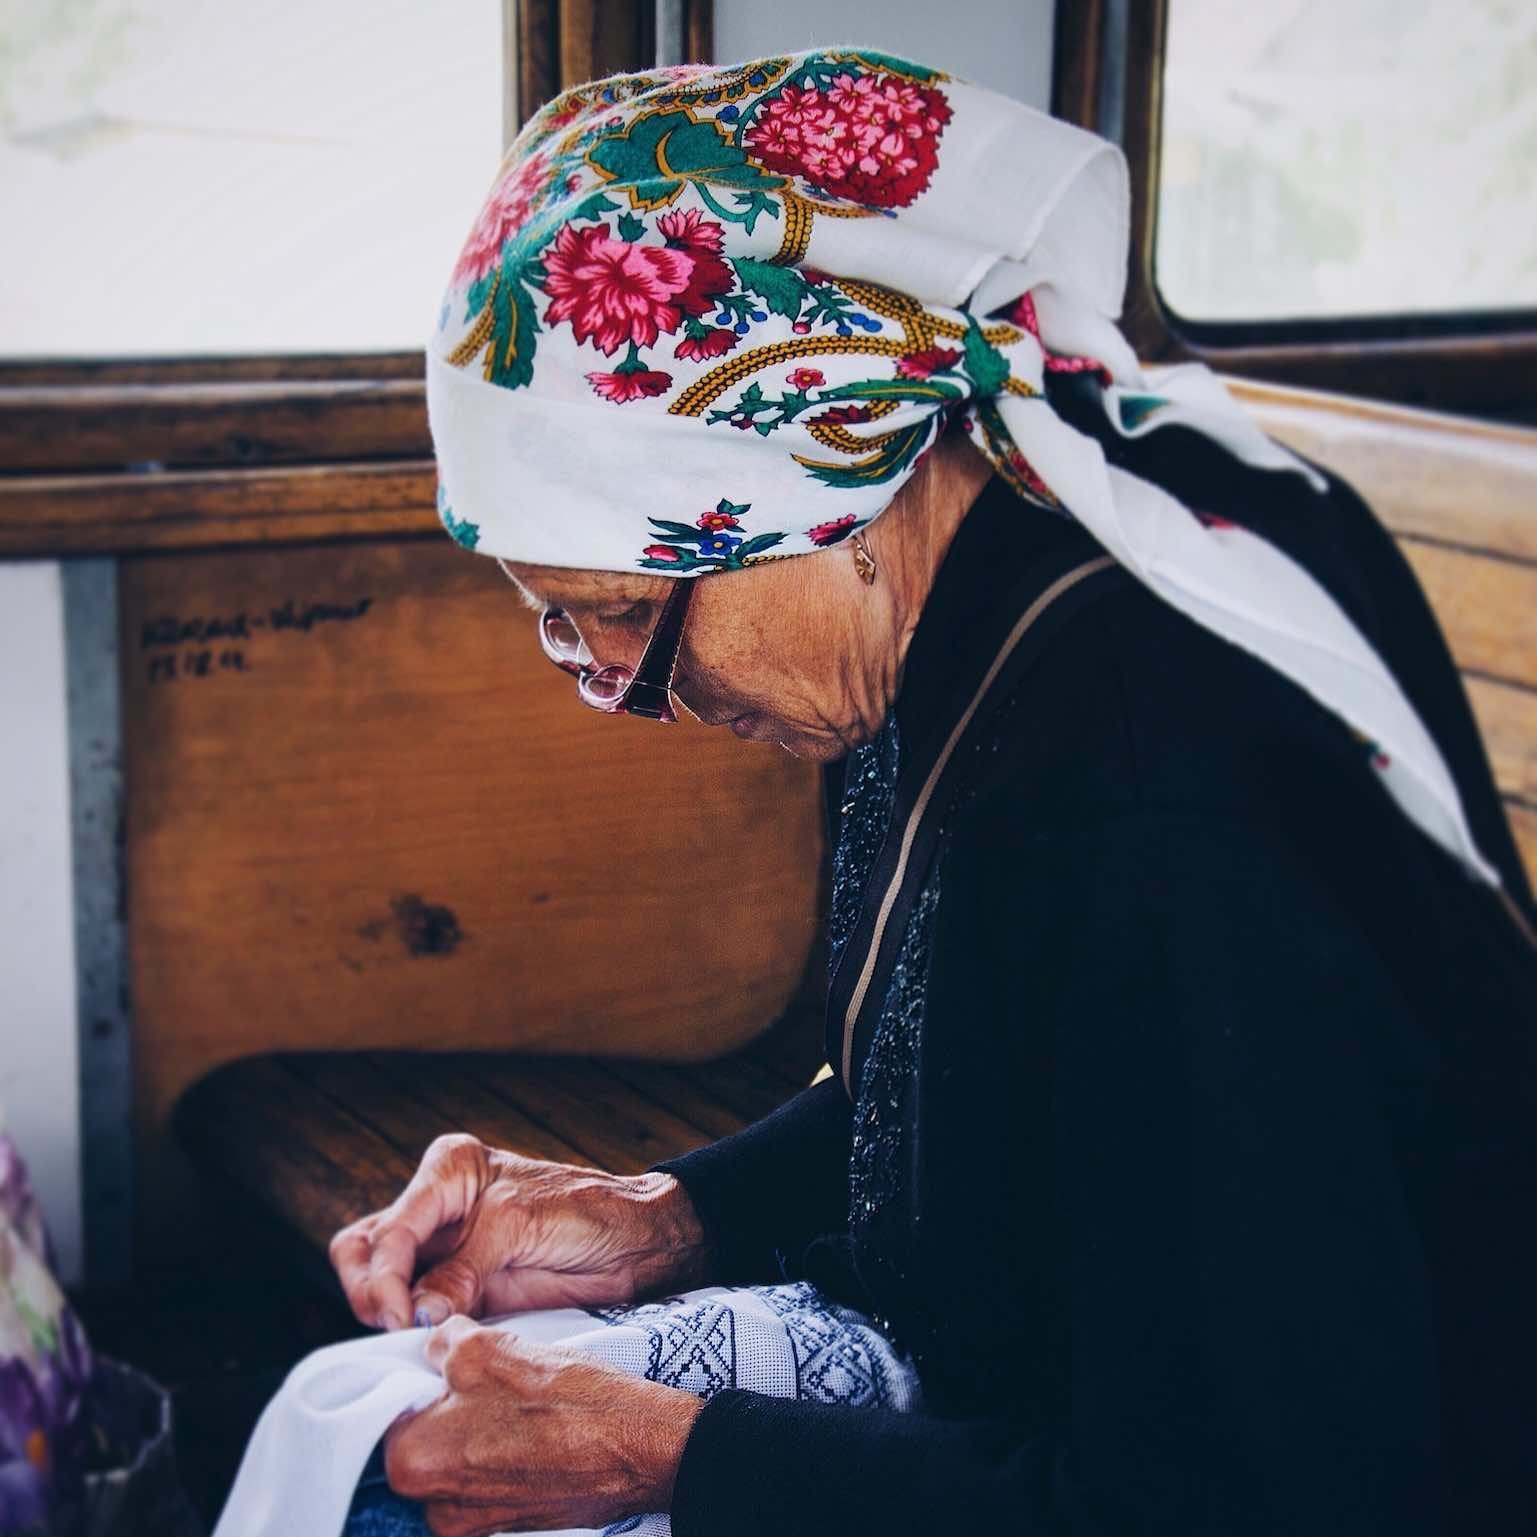 Woman sewing traditional fabric